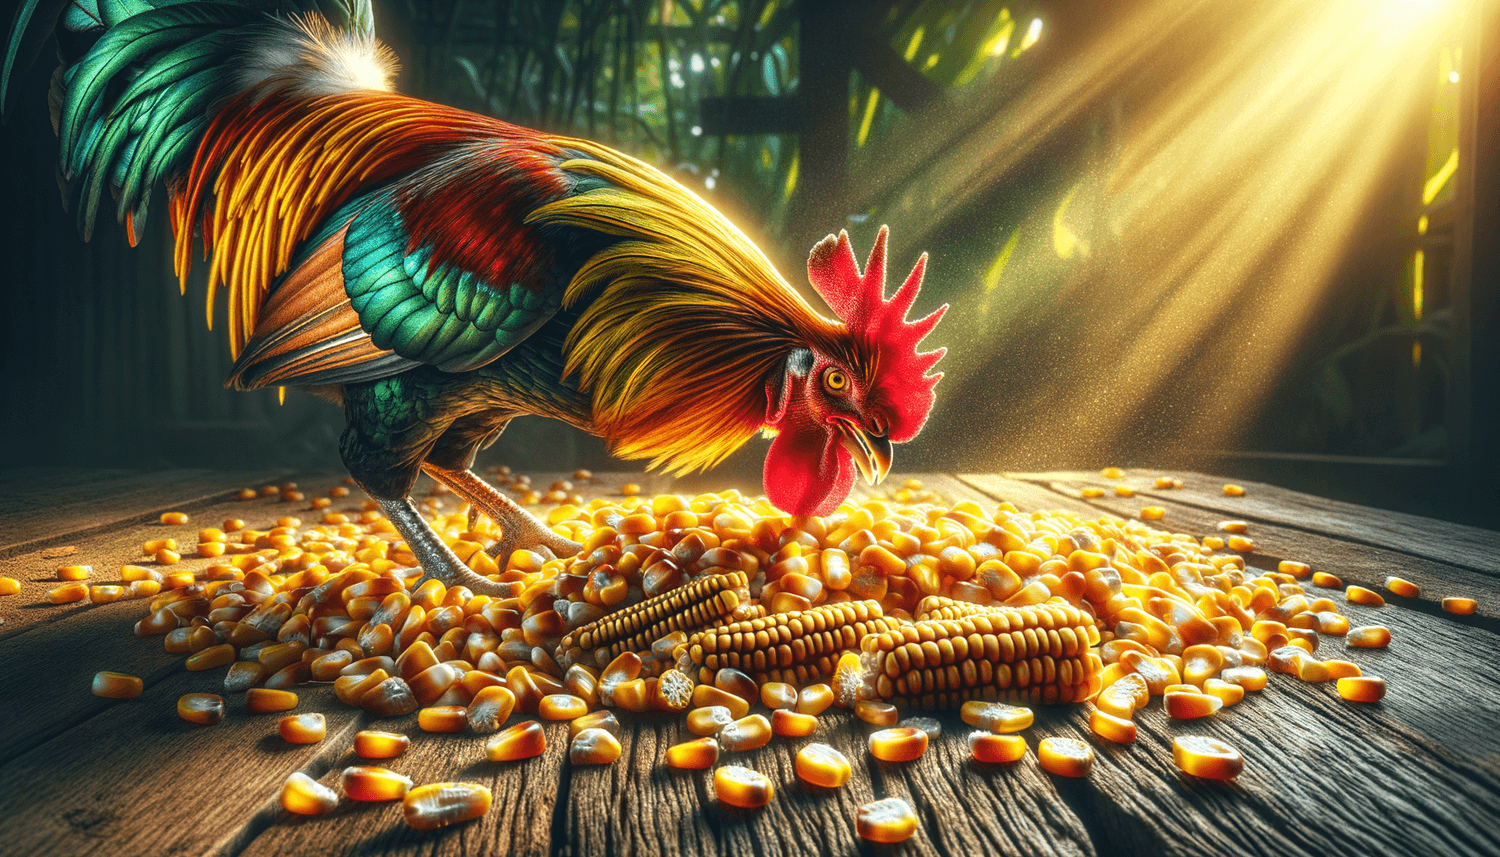 Can Chickens Eat Whole Dried Corn?